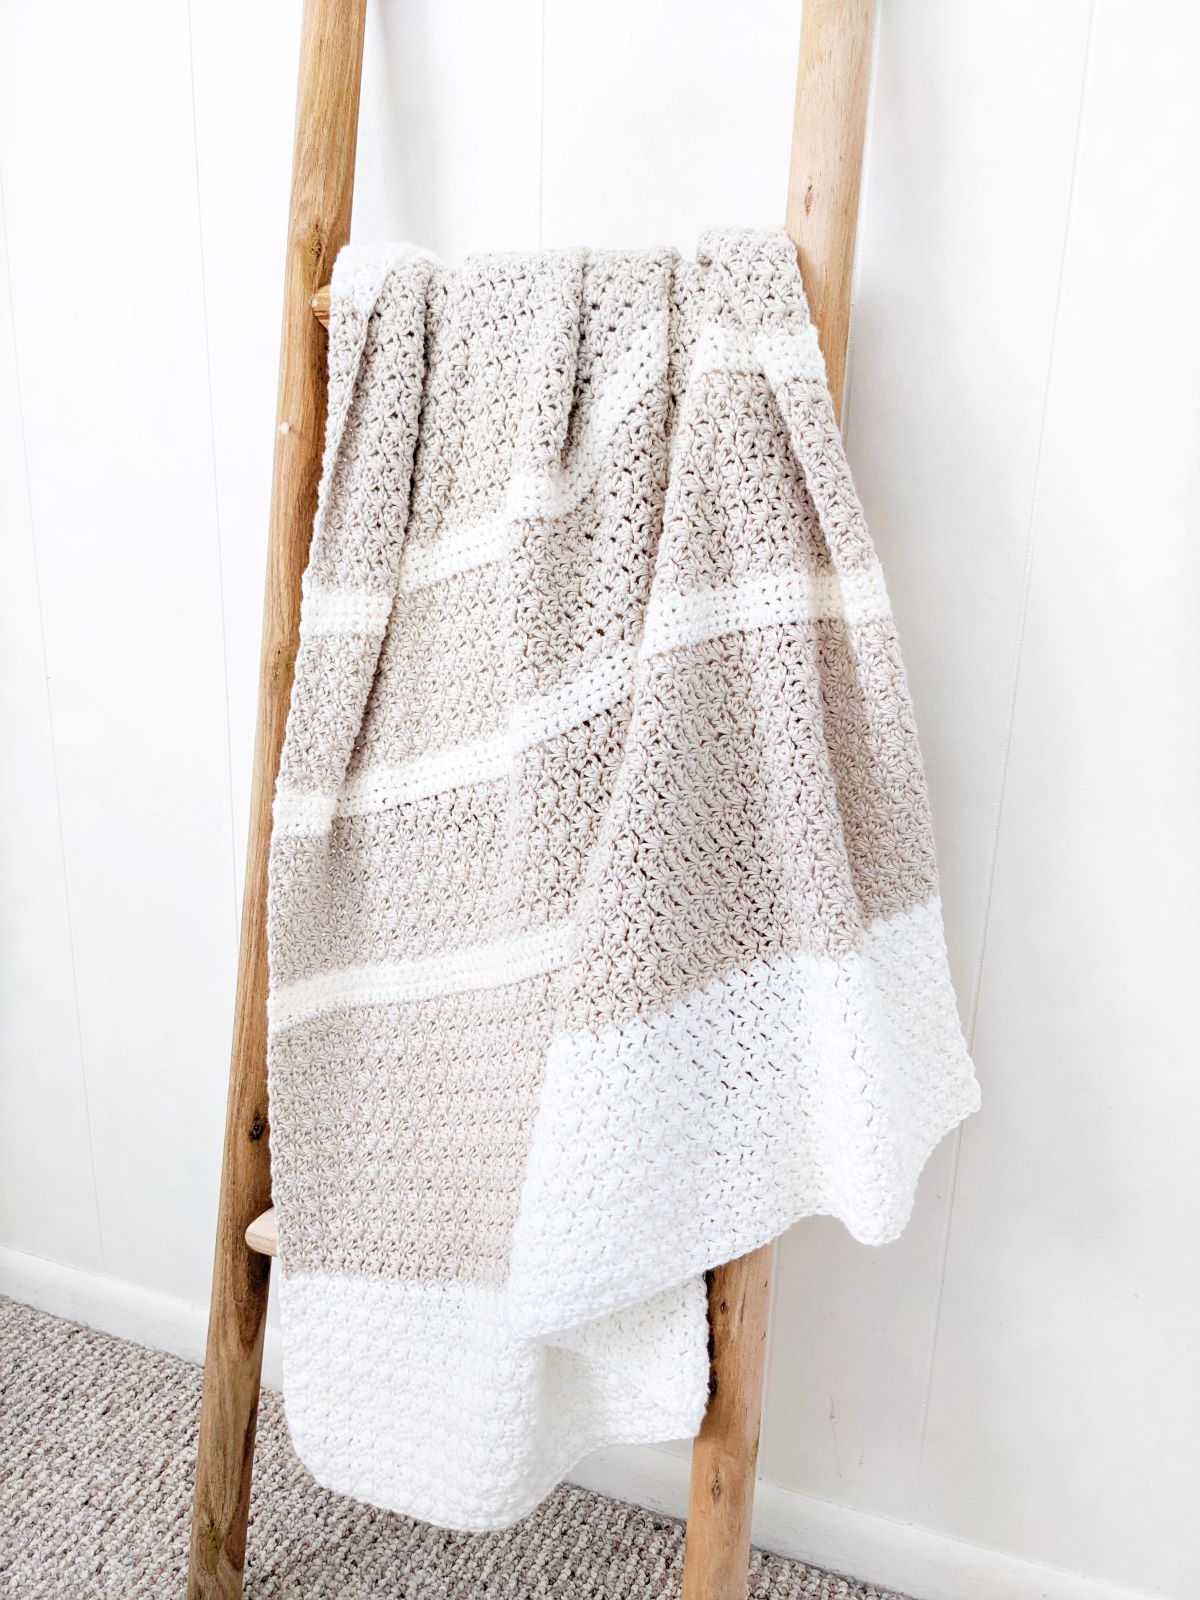 cozy cotton heirloom baby blanket on a wooden ladder.